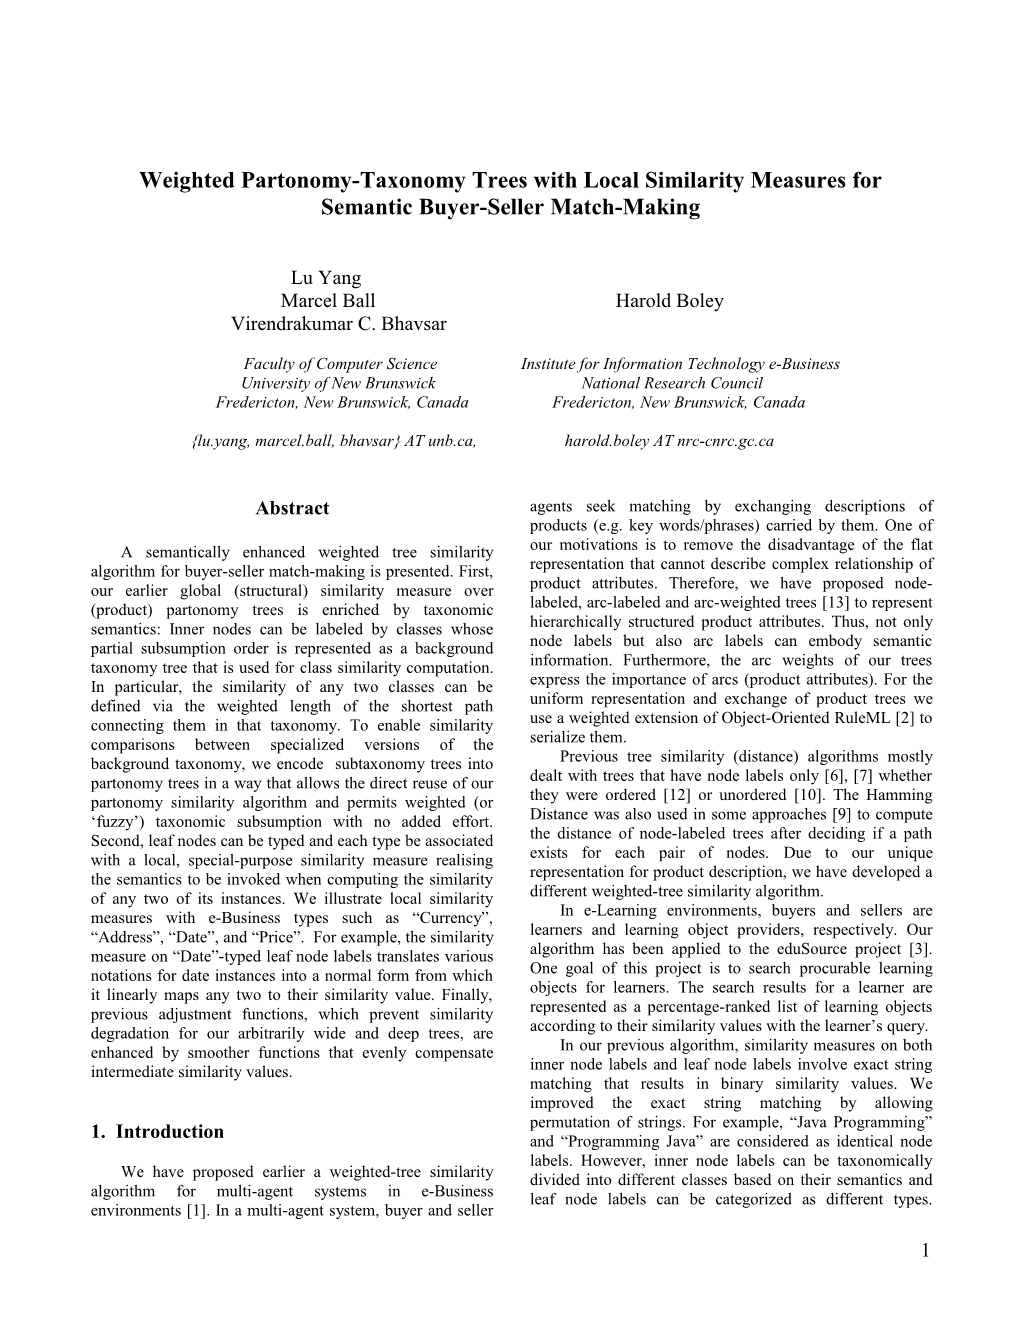 A Weighted-Tree Similarity Algorithm for Multi-Agent Systems in E-Business Environments